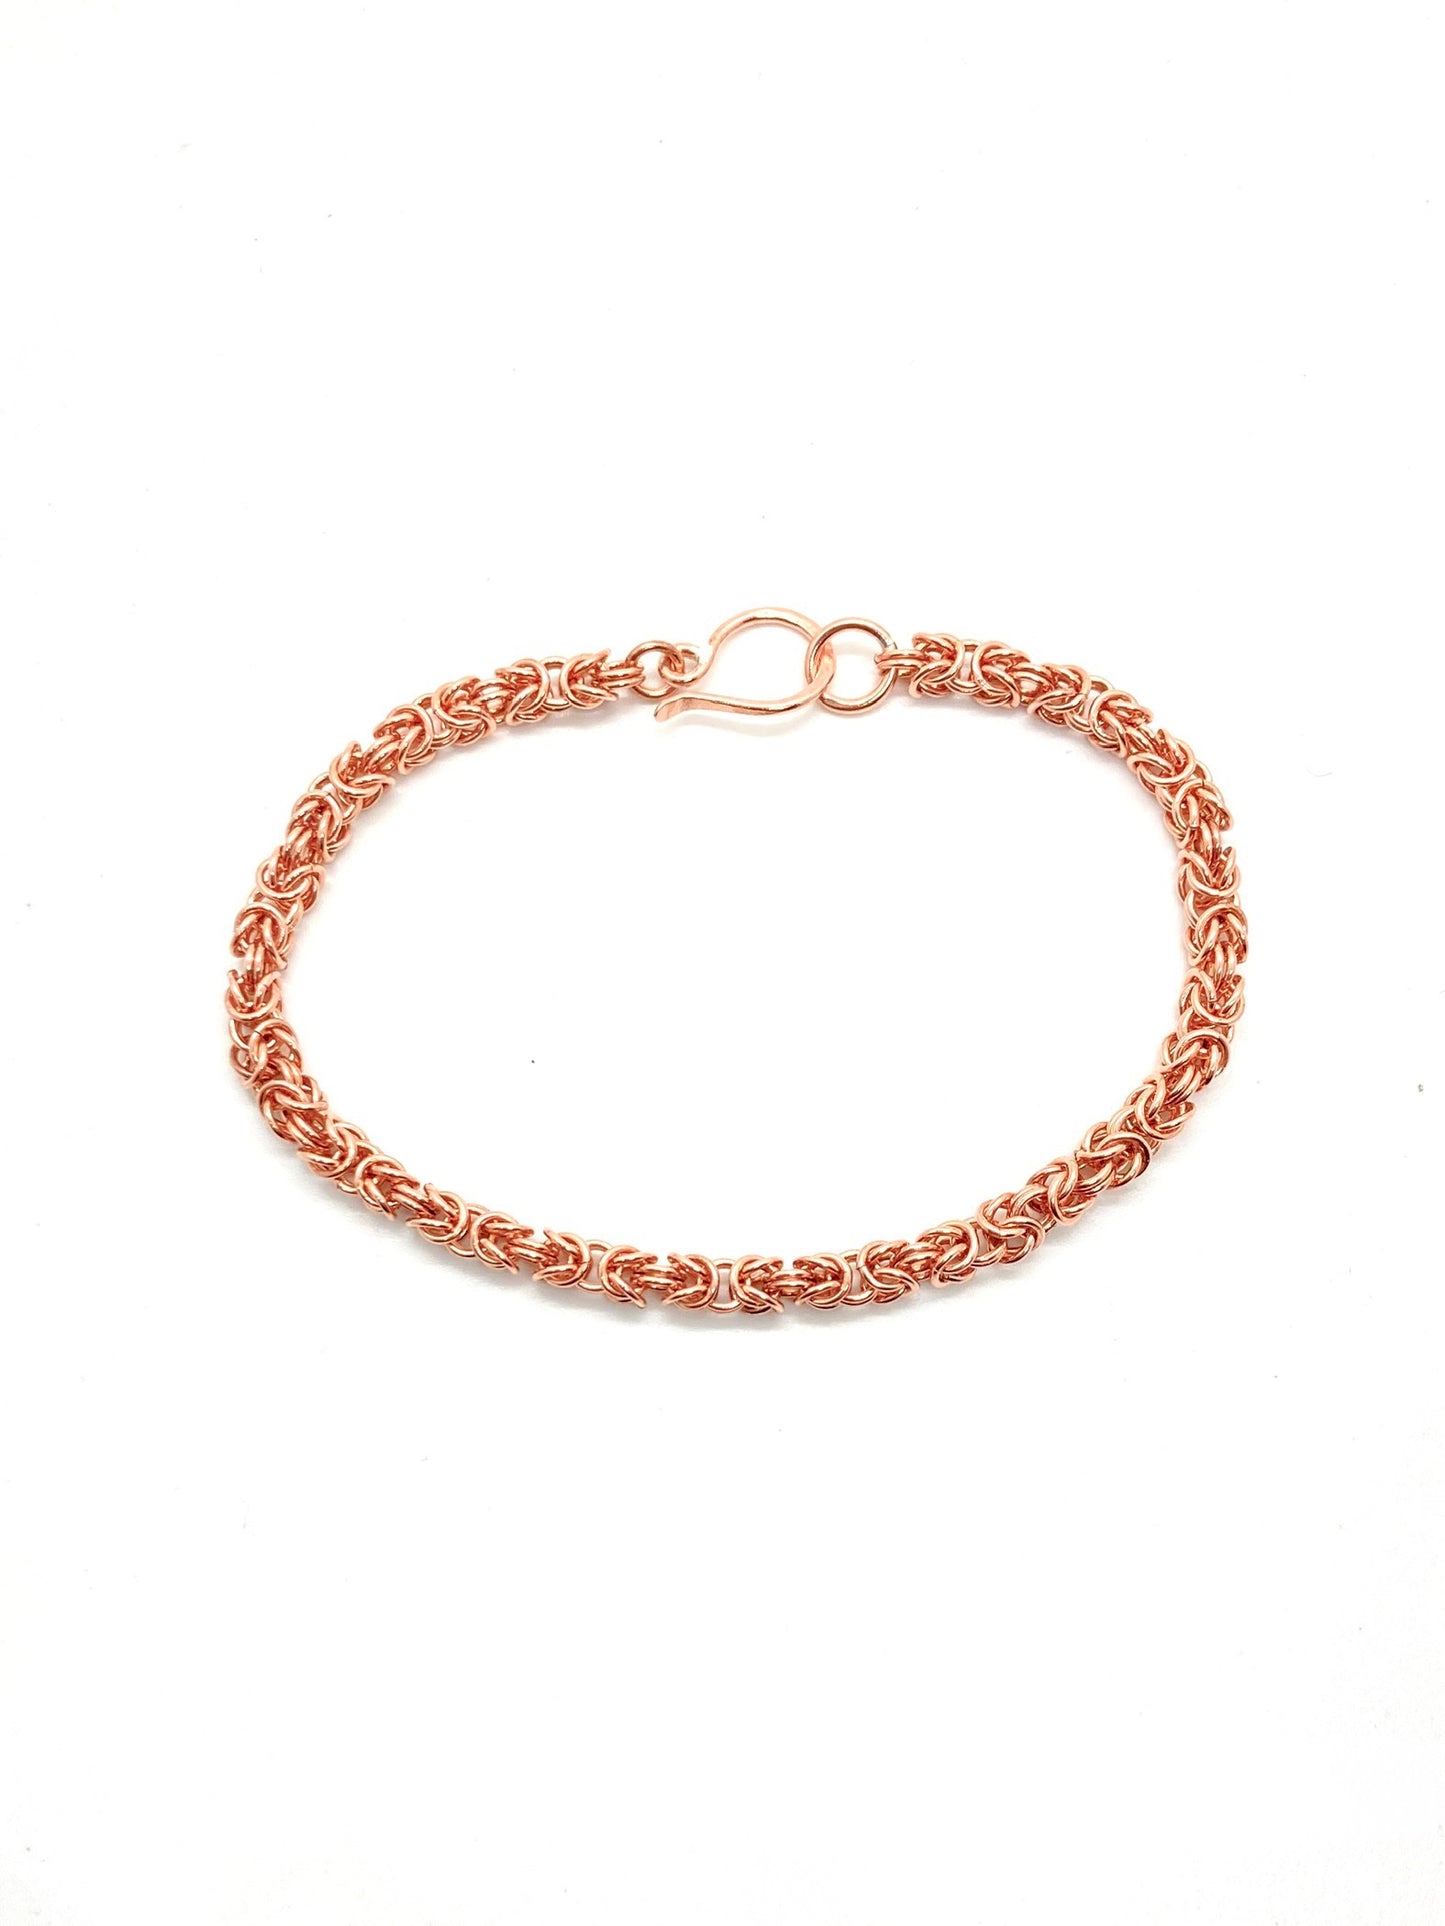 Delicate Byzantine Chainmaille Bracelet in Copper